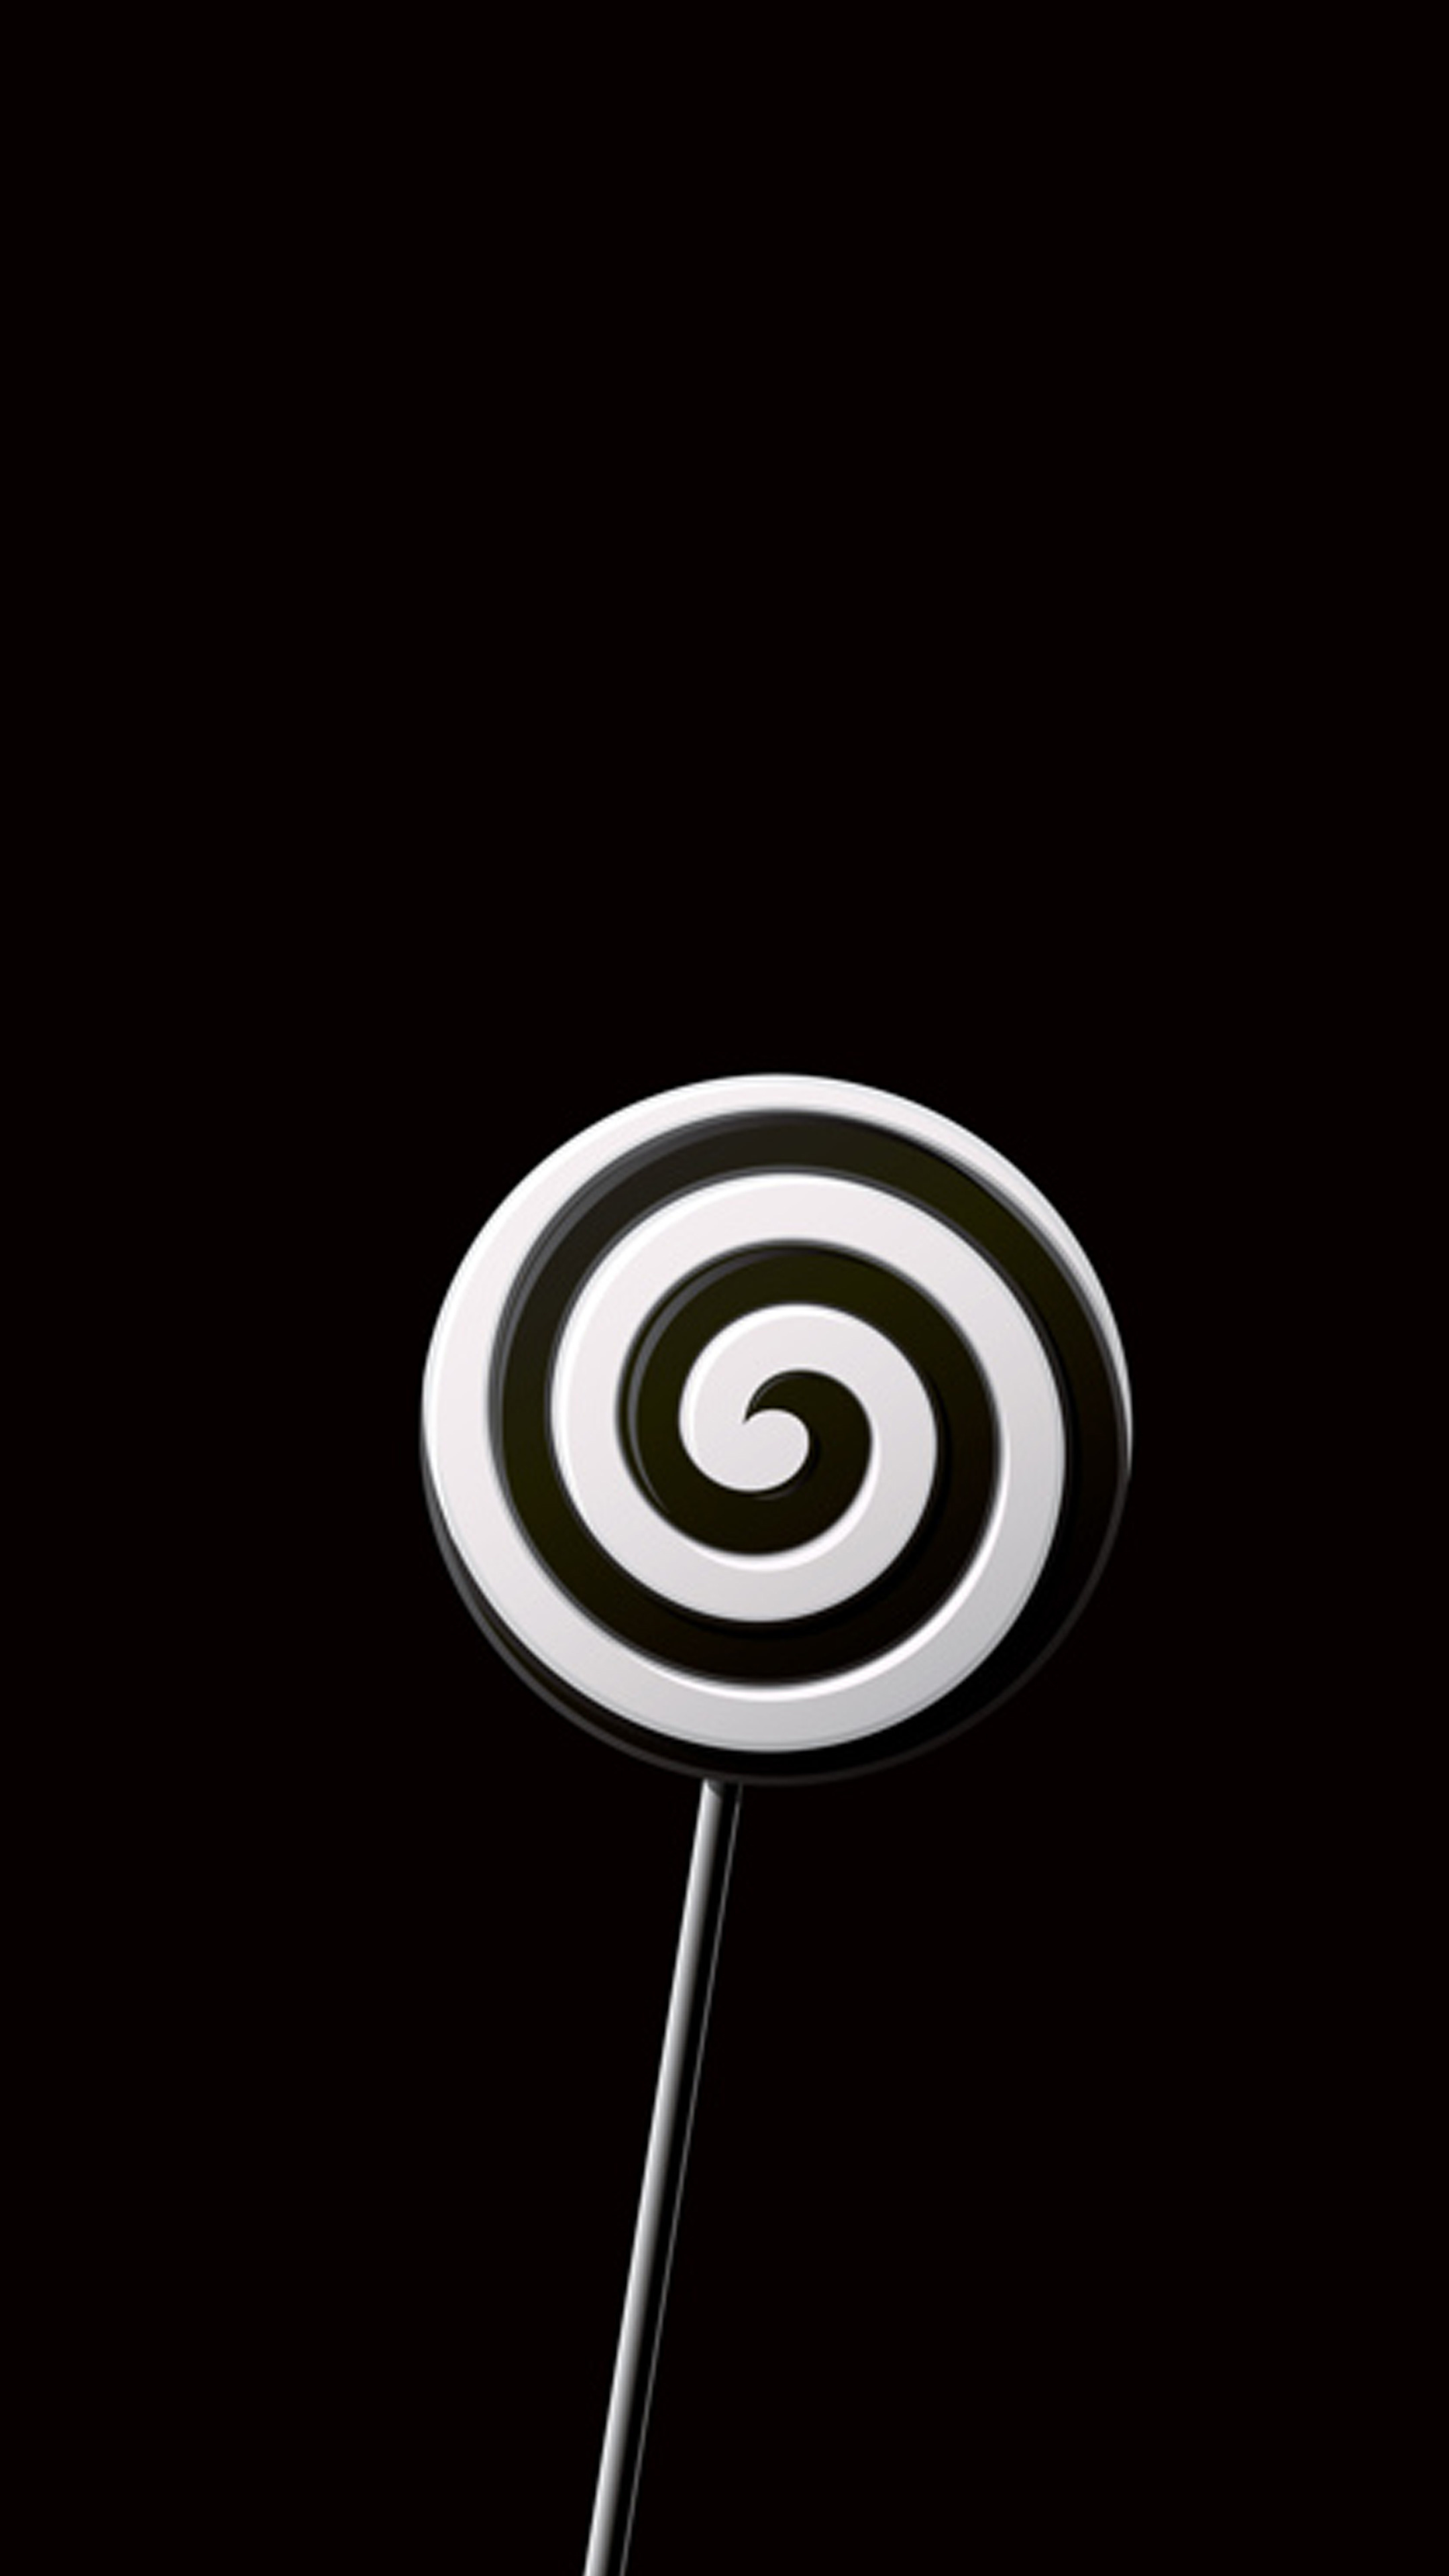 Mobile lollipop wallpaper, Compact and cute, Sweet and playful, Perfect addition to your phone, 2160x3840 4K Handy